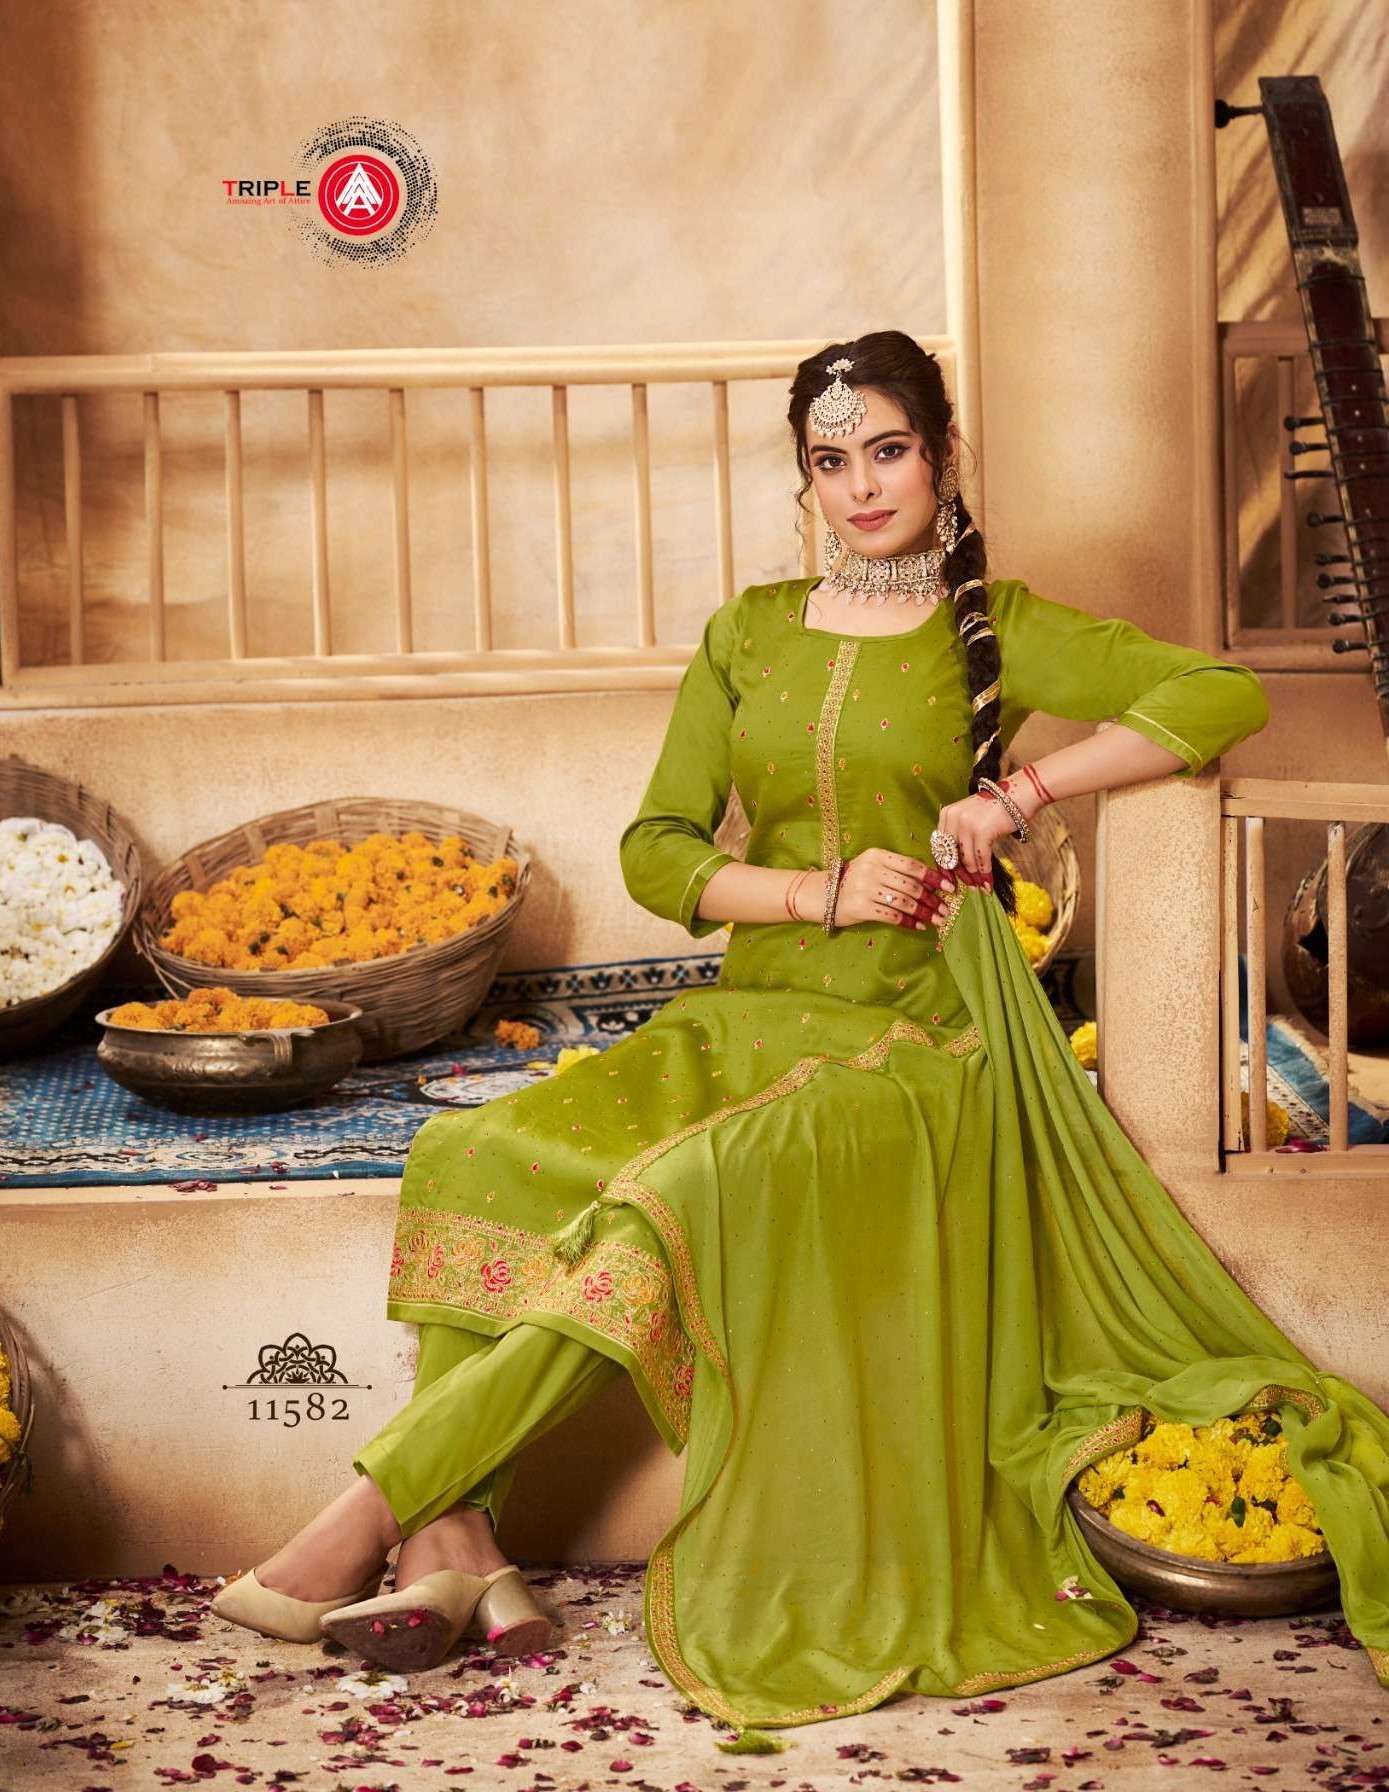 Triple AAA Laymi New Designs Cotton Suit Festive Collection